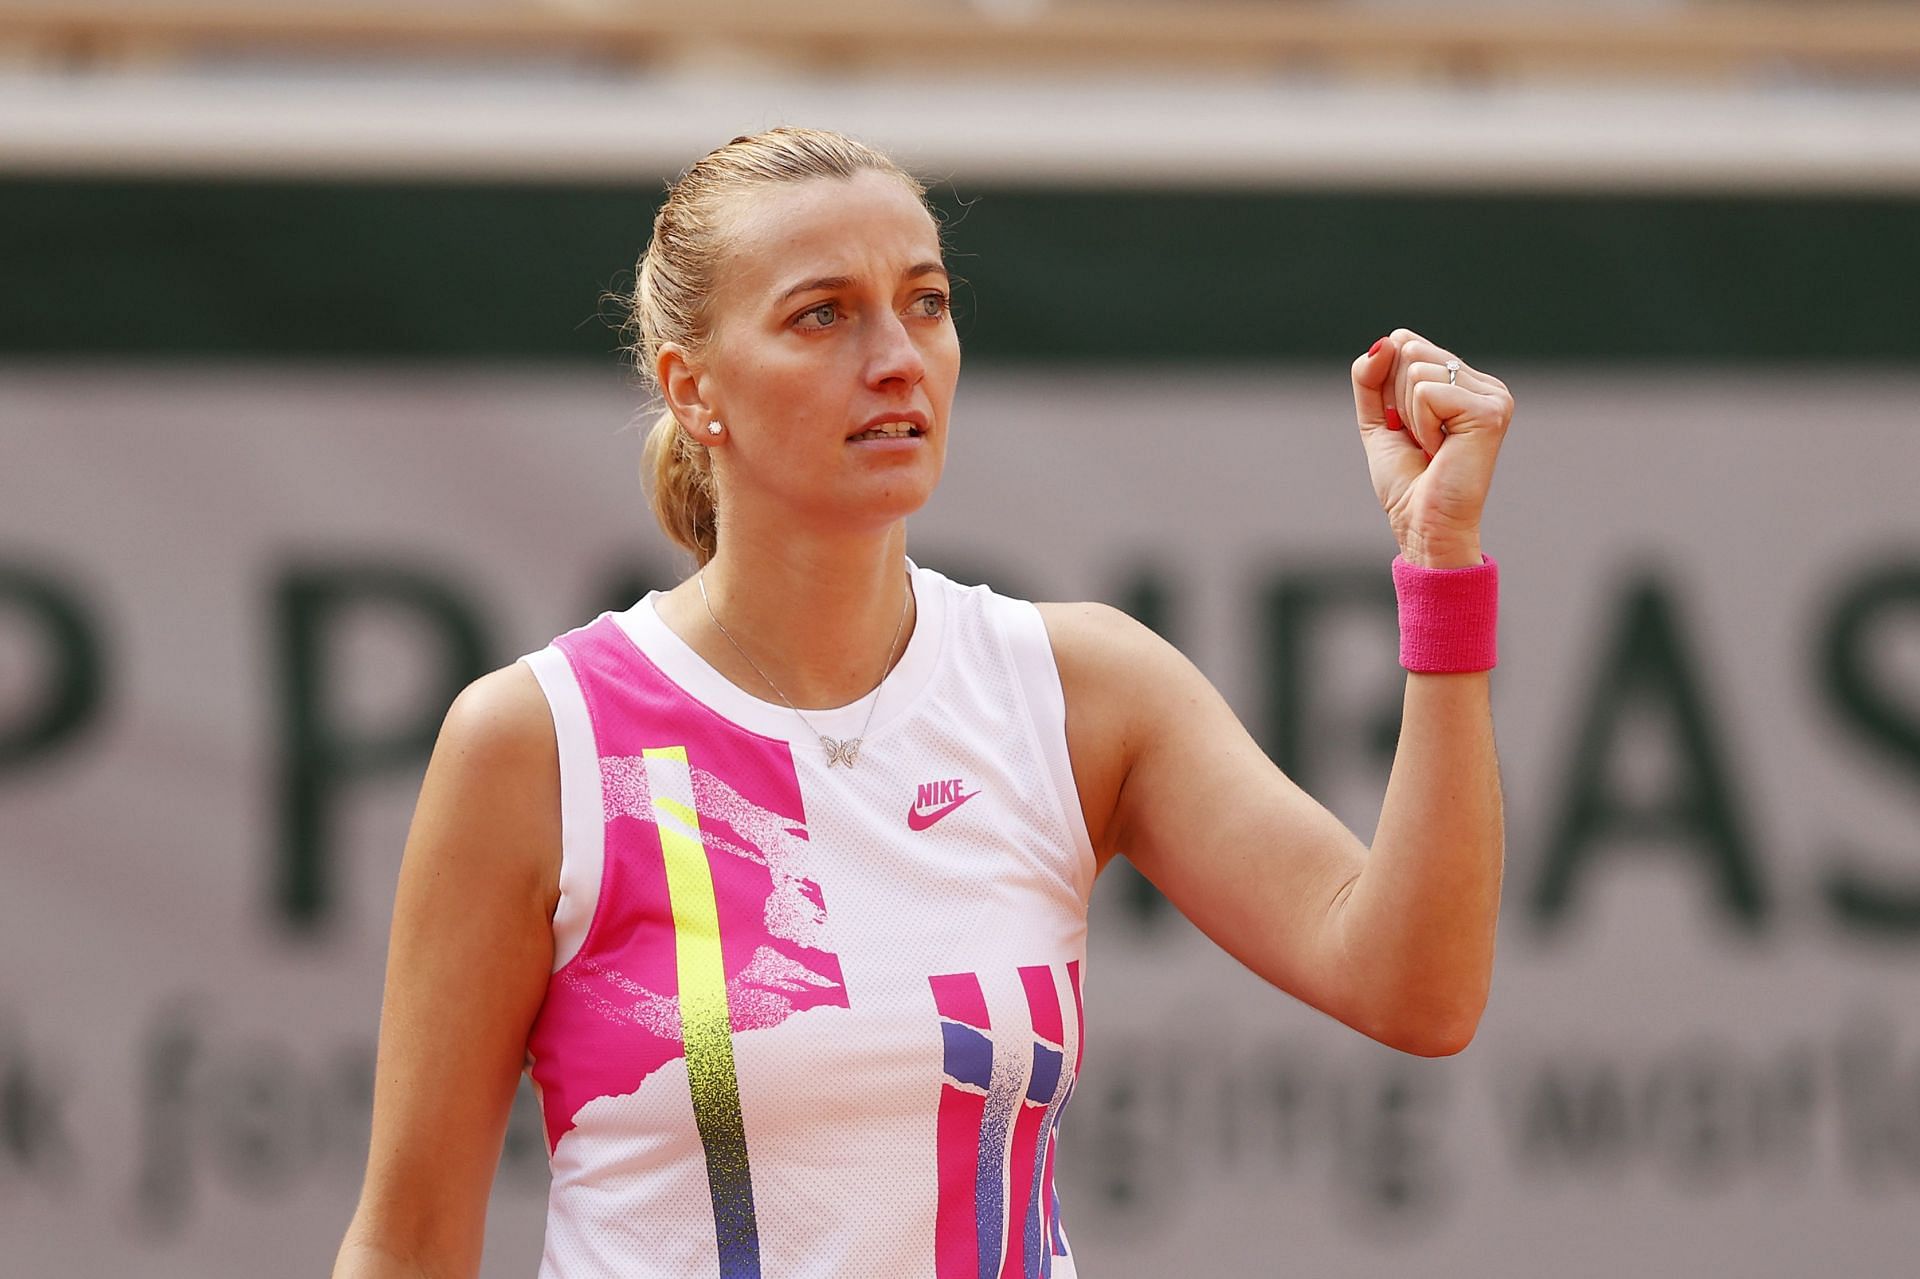 Kvitova holds the record for most wins at the Madrid Open.